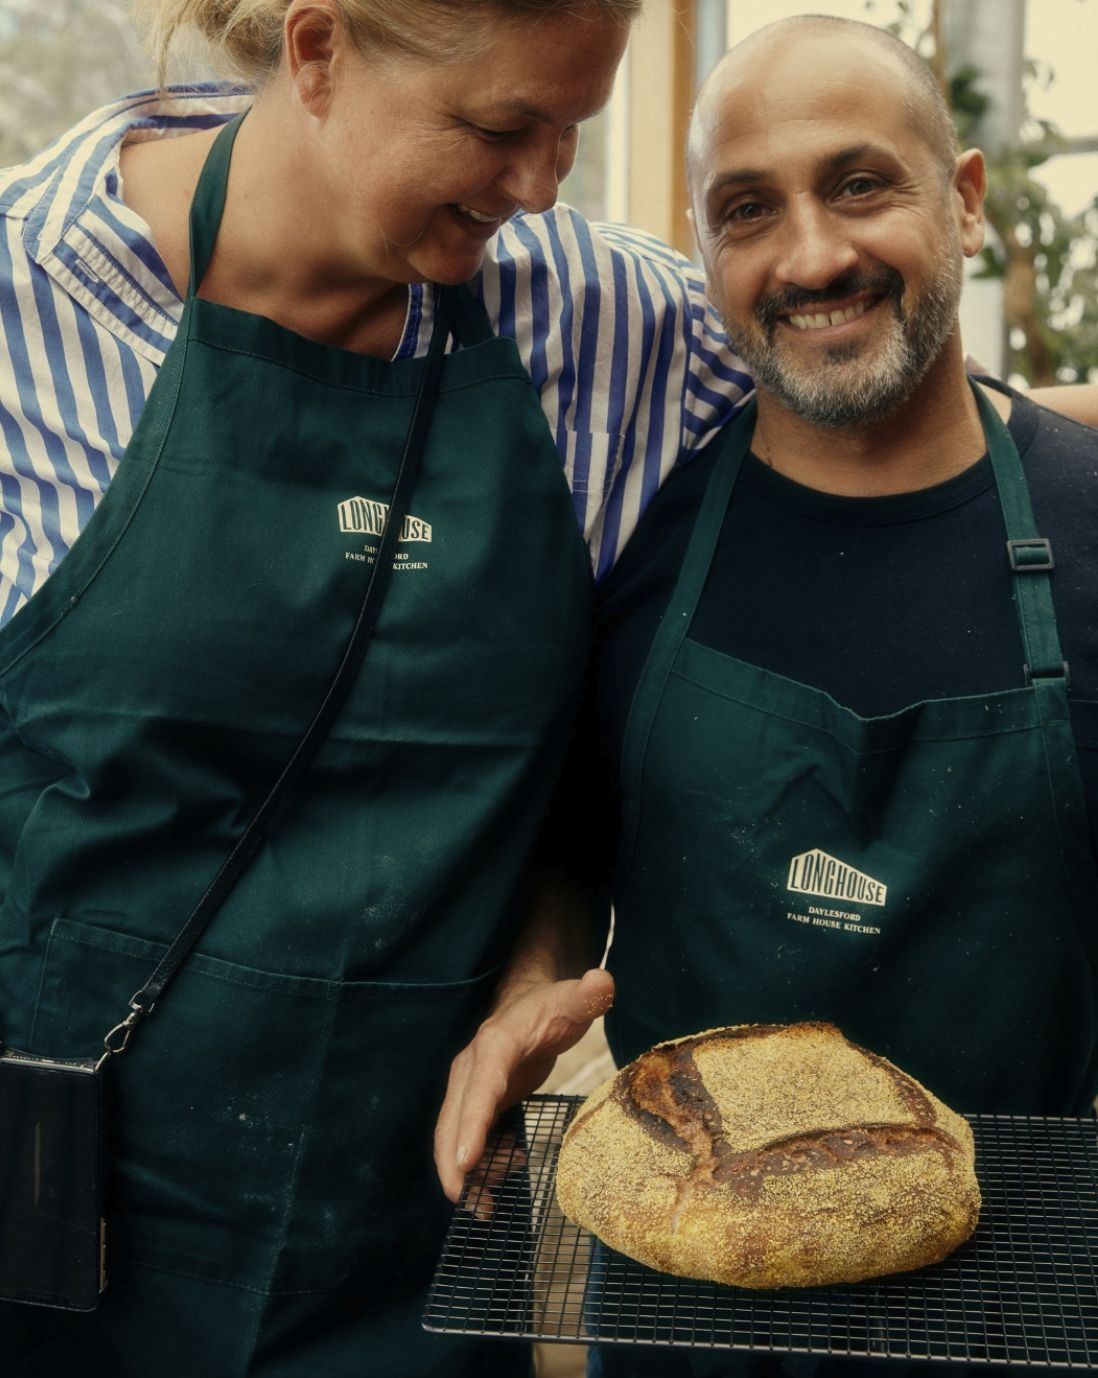 Smiling man and woman in green aprons holding a fresh baked sourdough